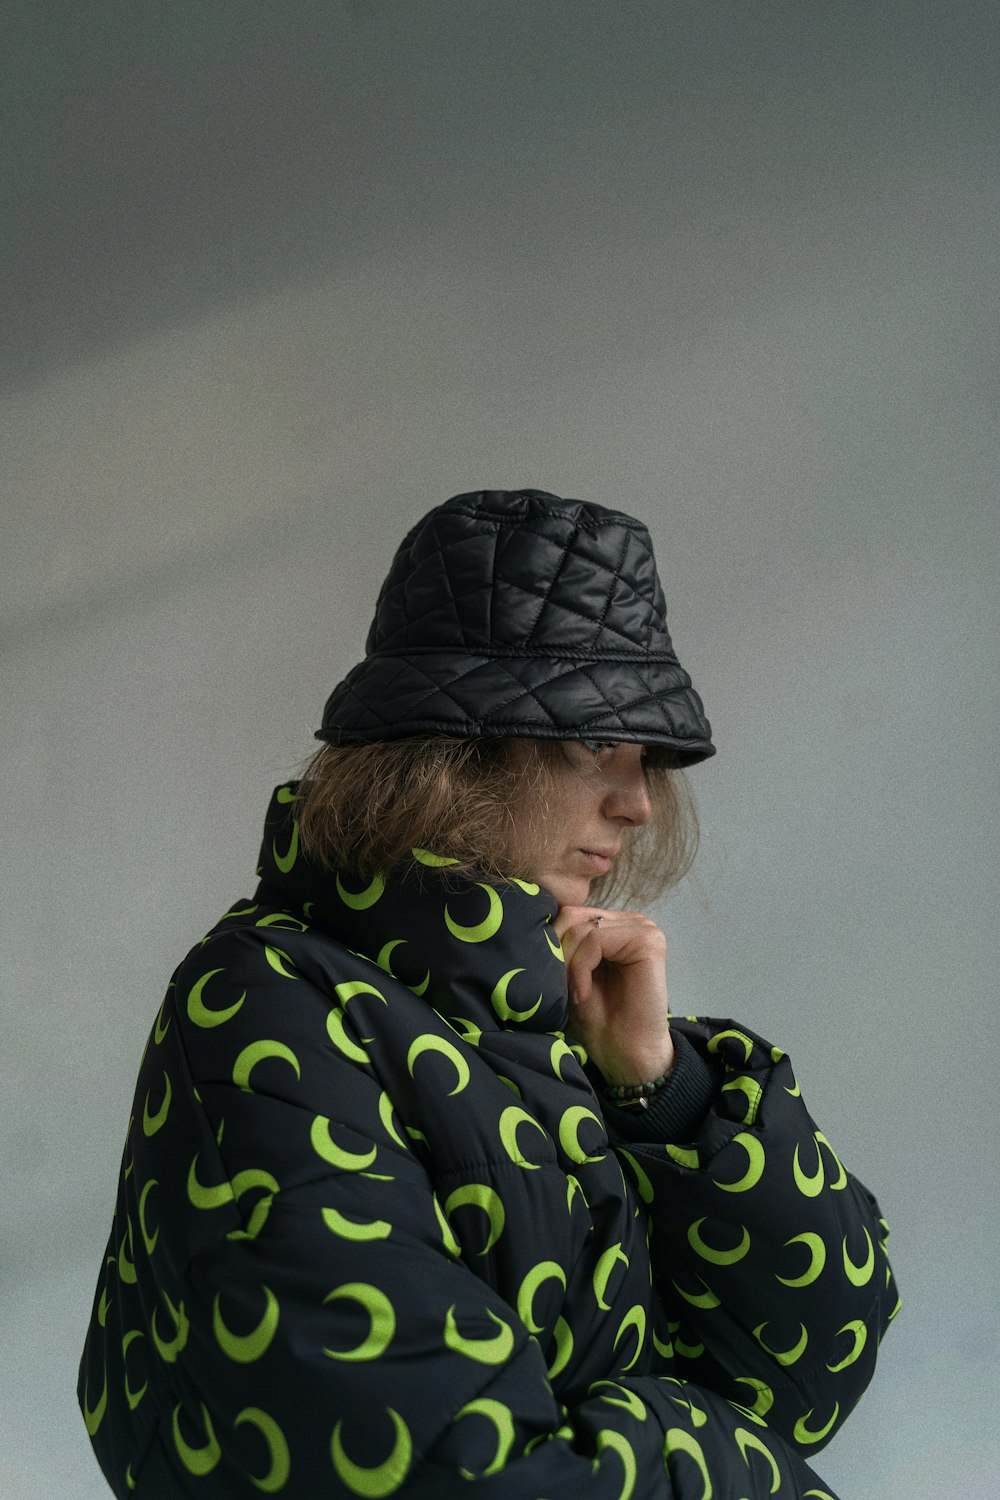 a person wearing a black hat and a green and black jacket